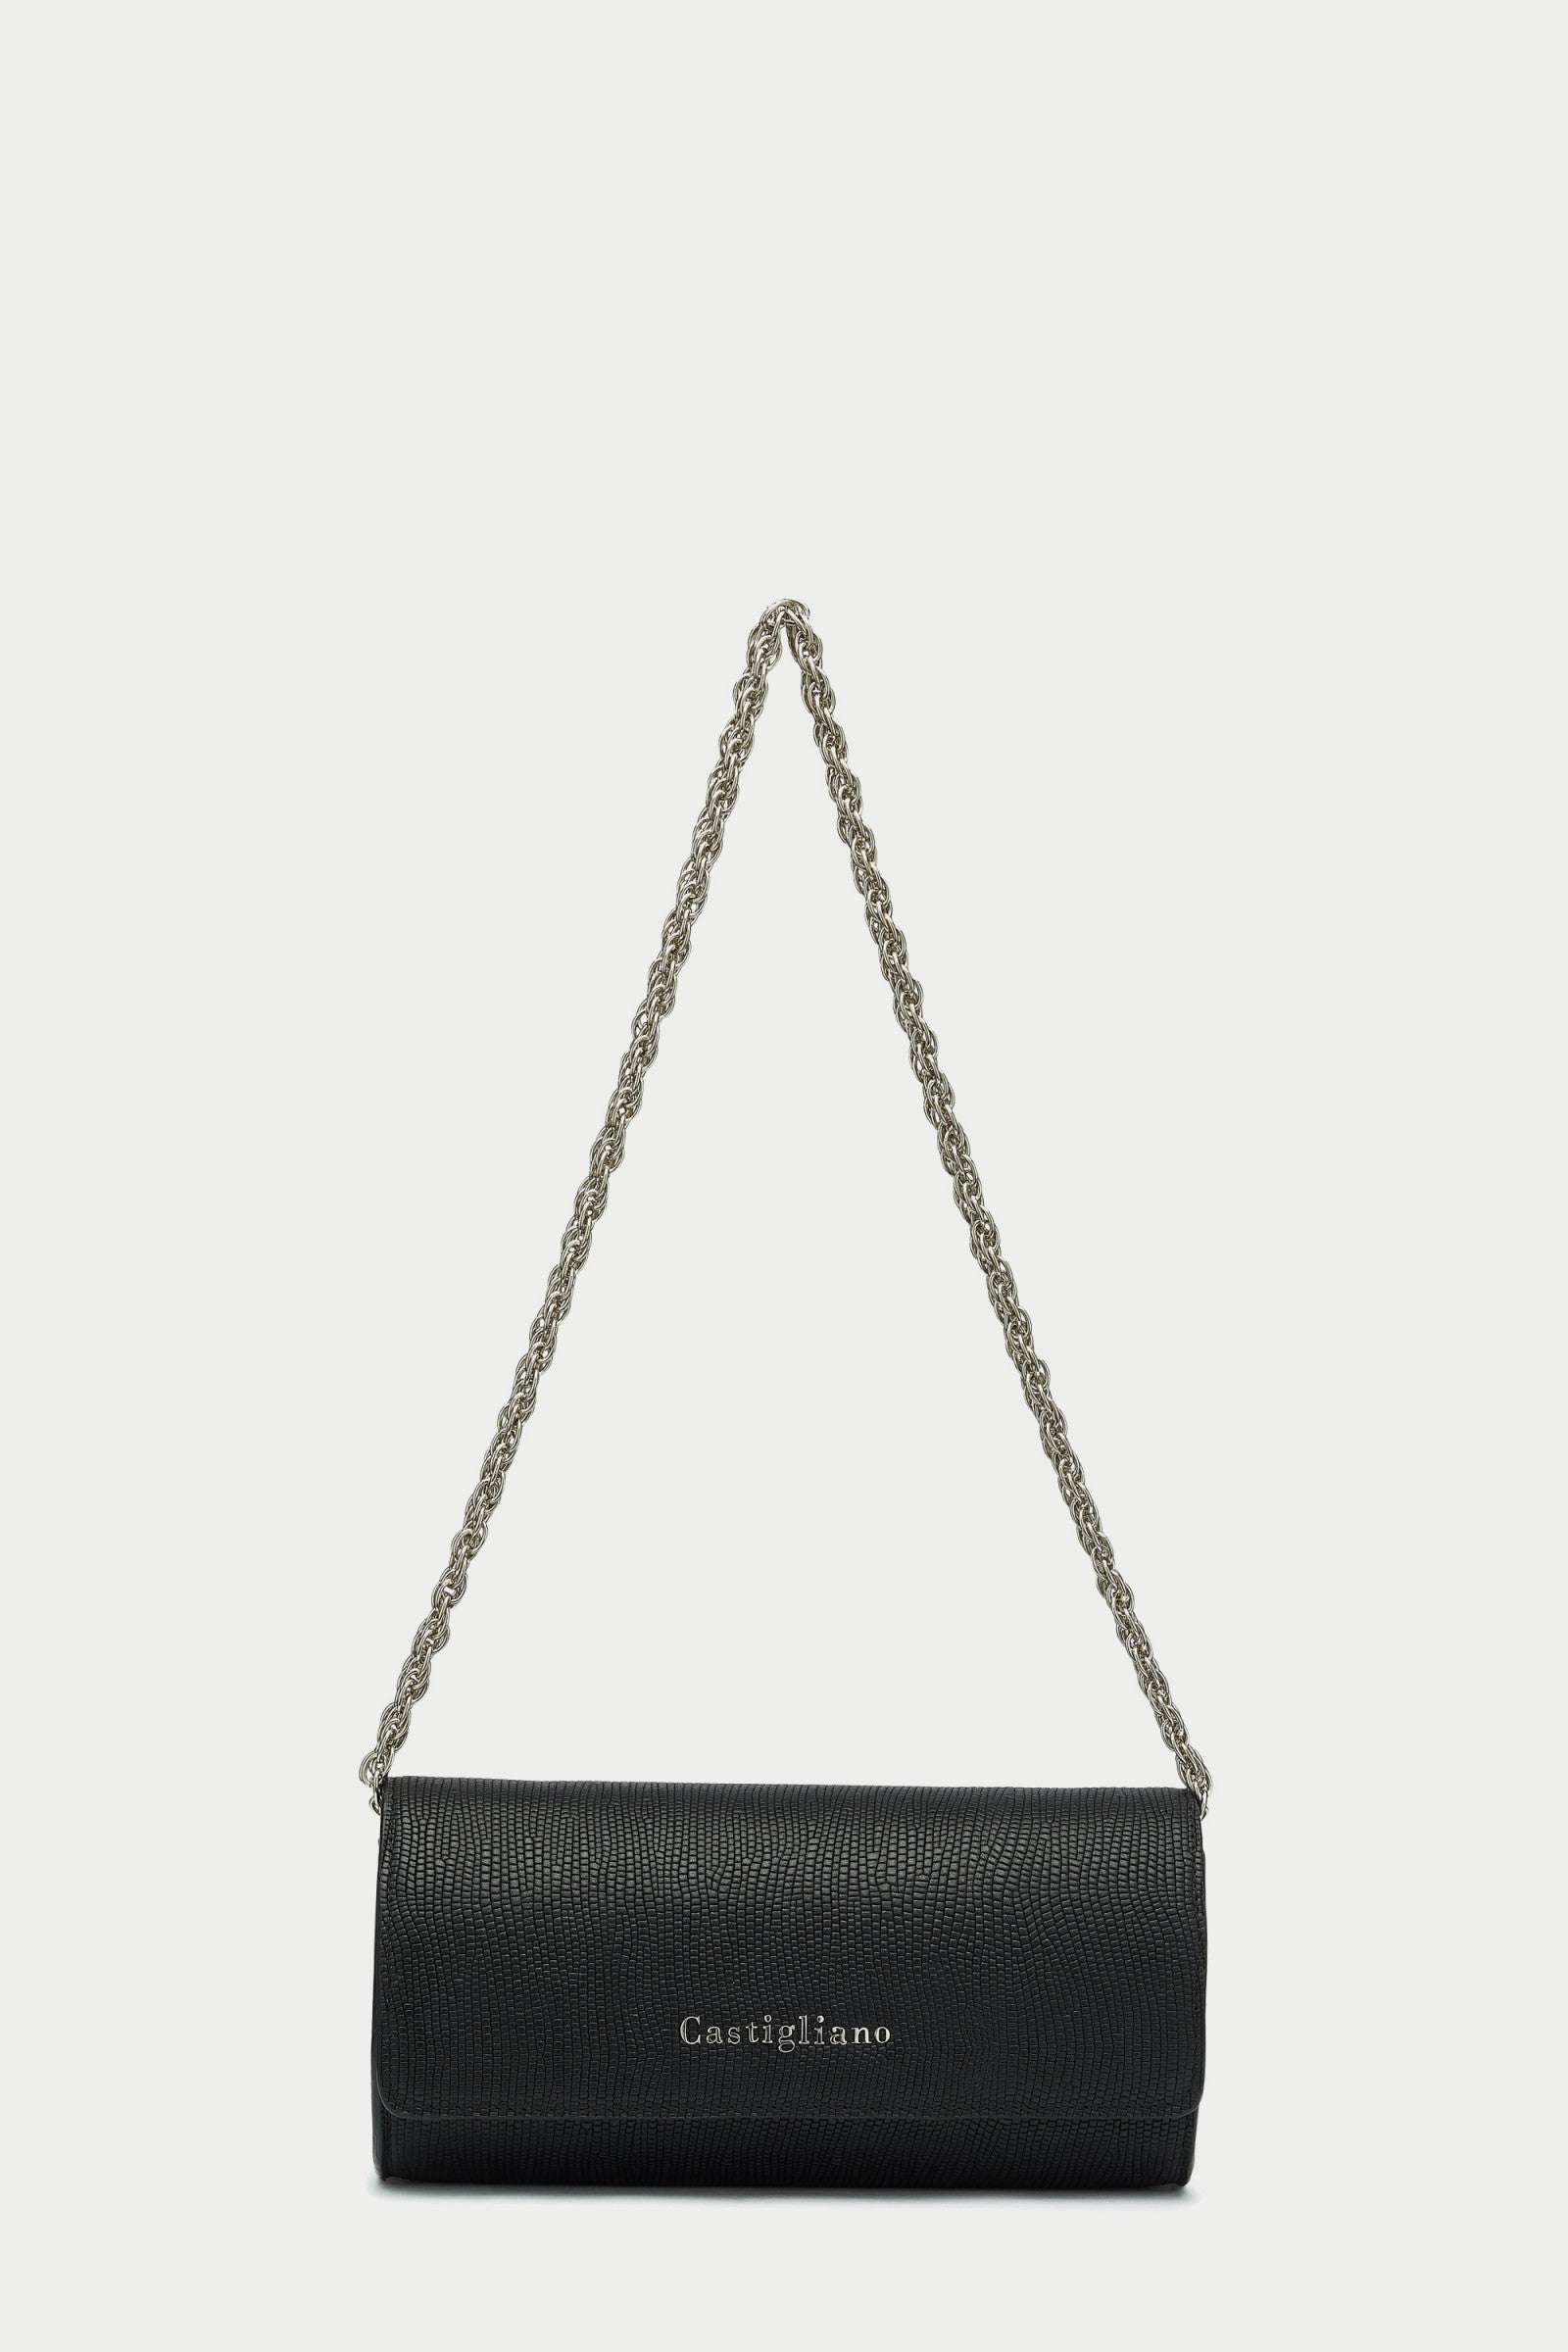 Kinsely BLACK Leather Roll Clutch